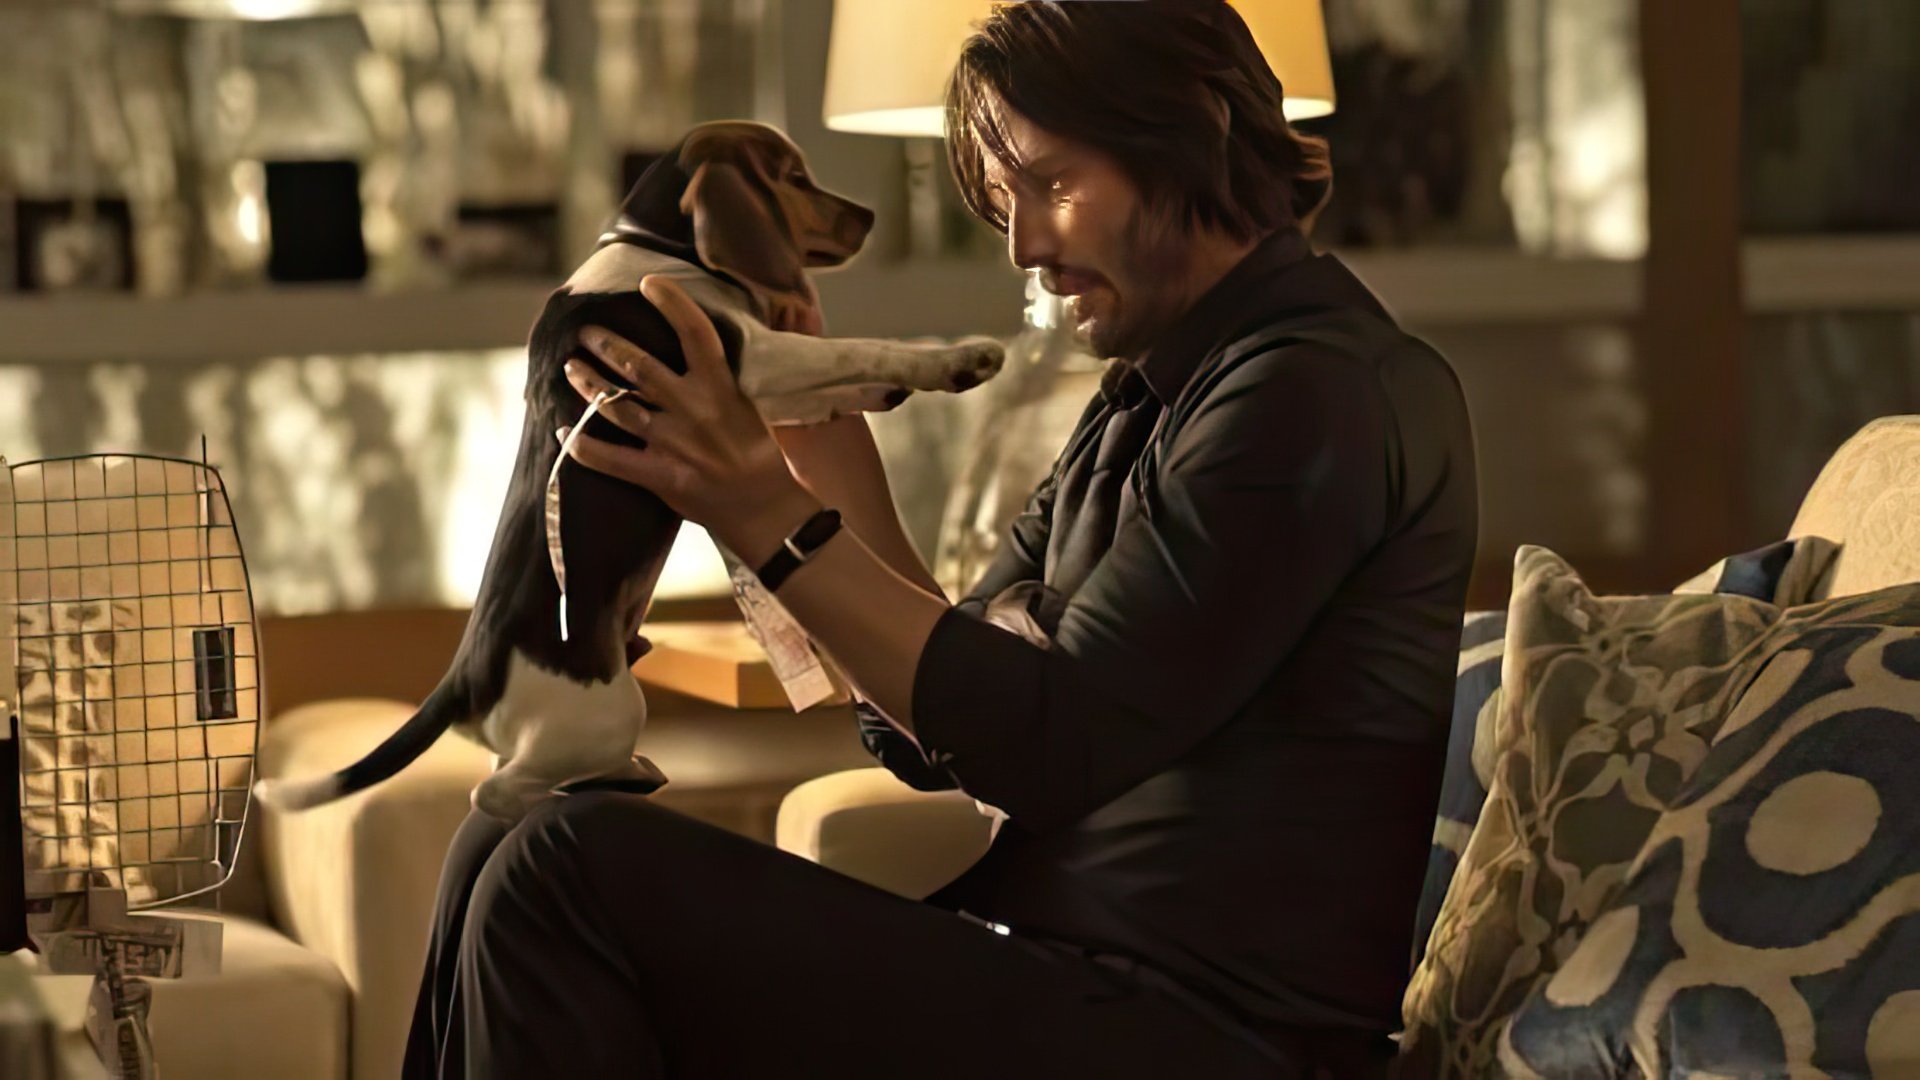 A snapshot from “John Wick”